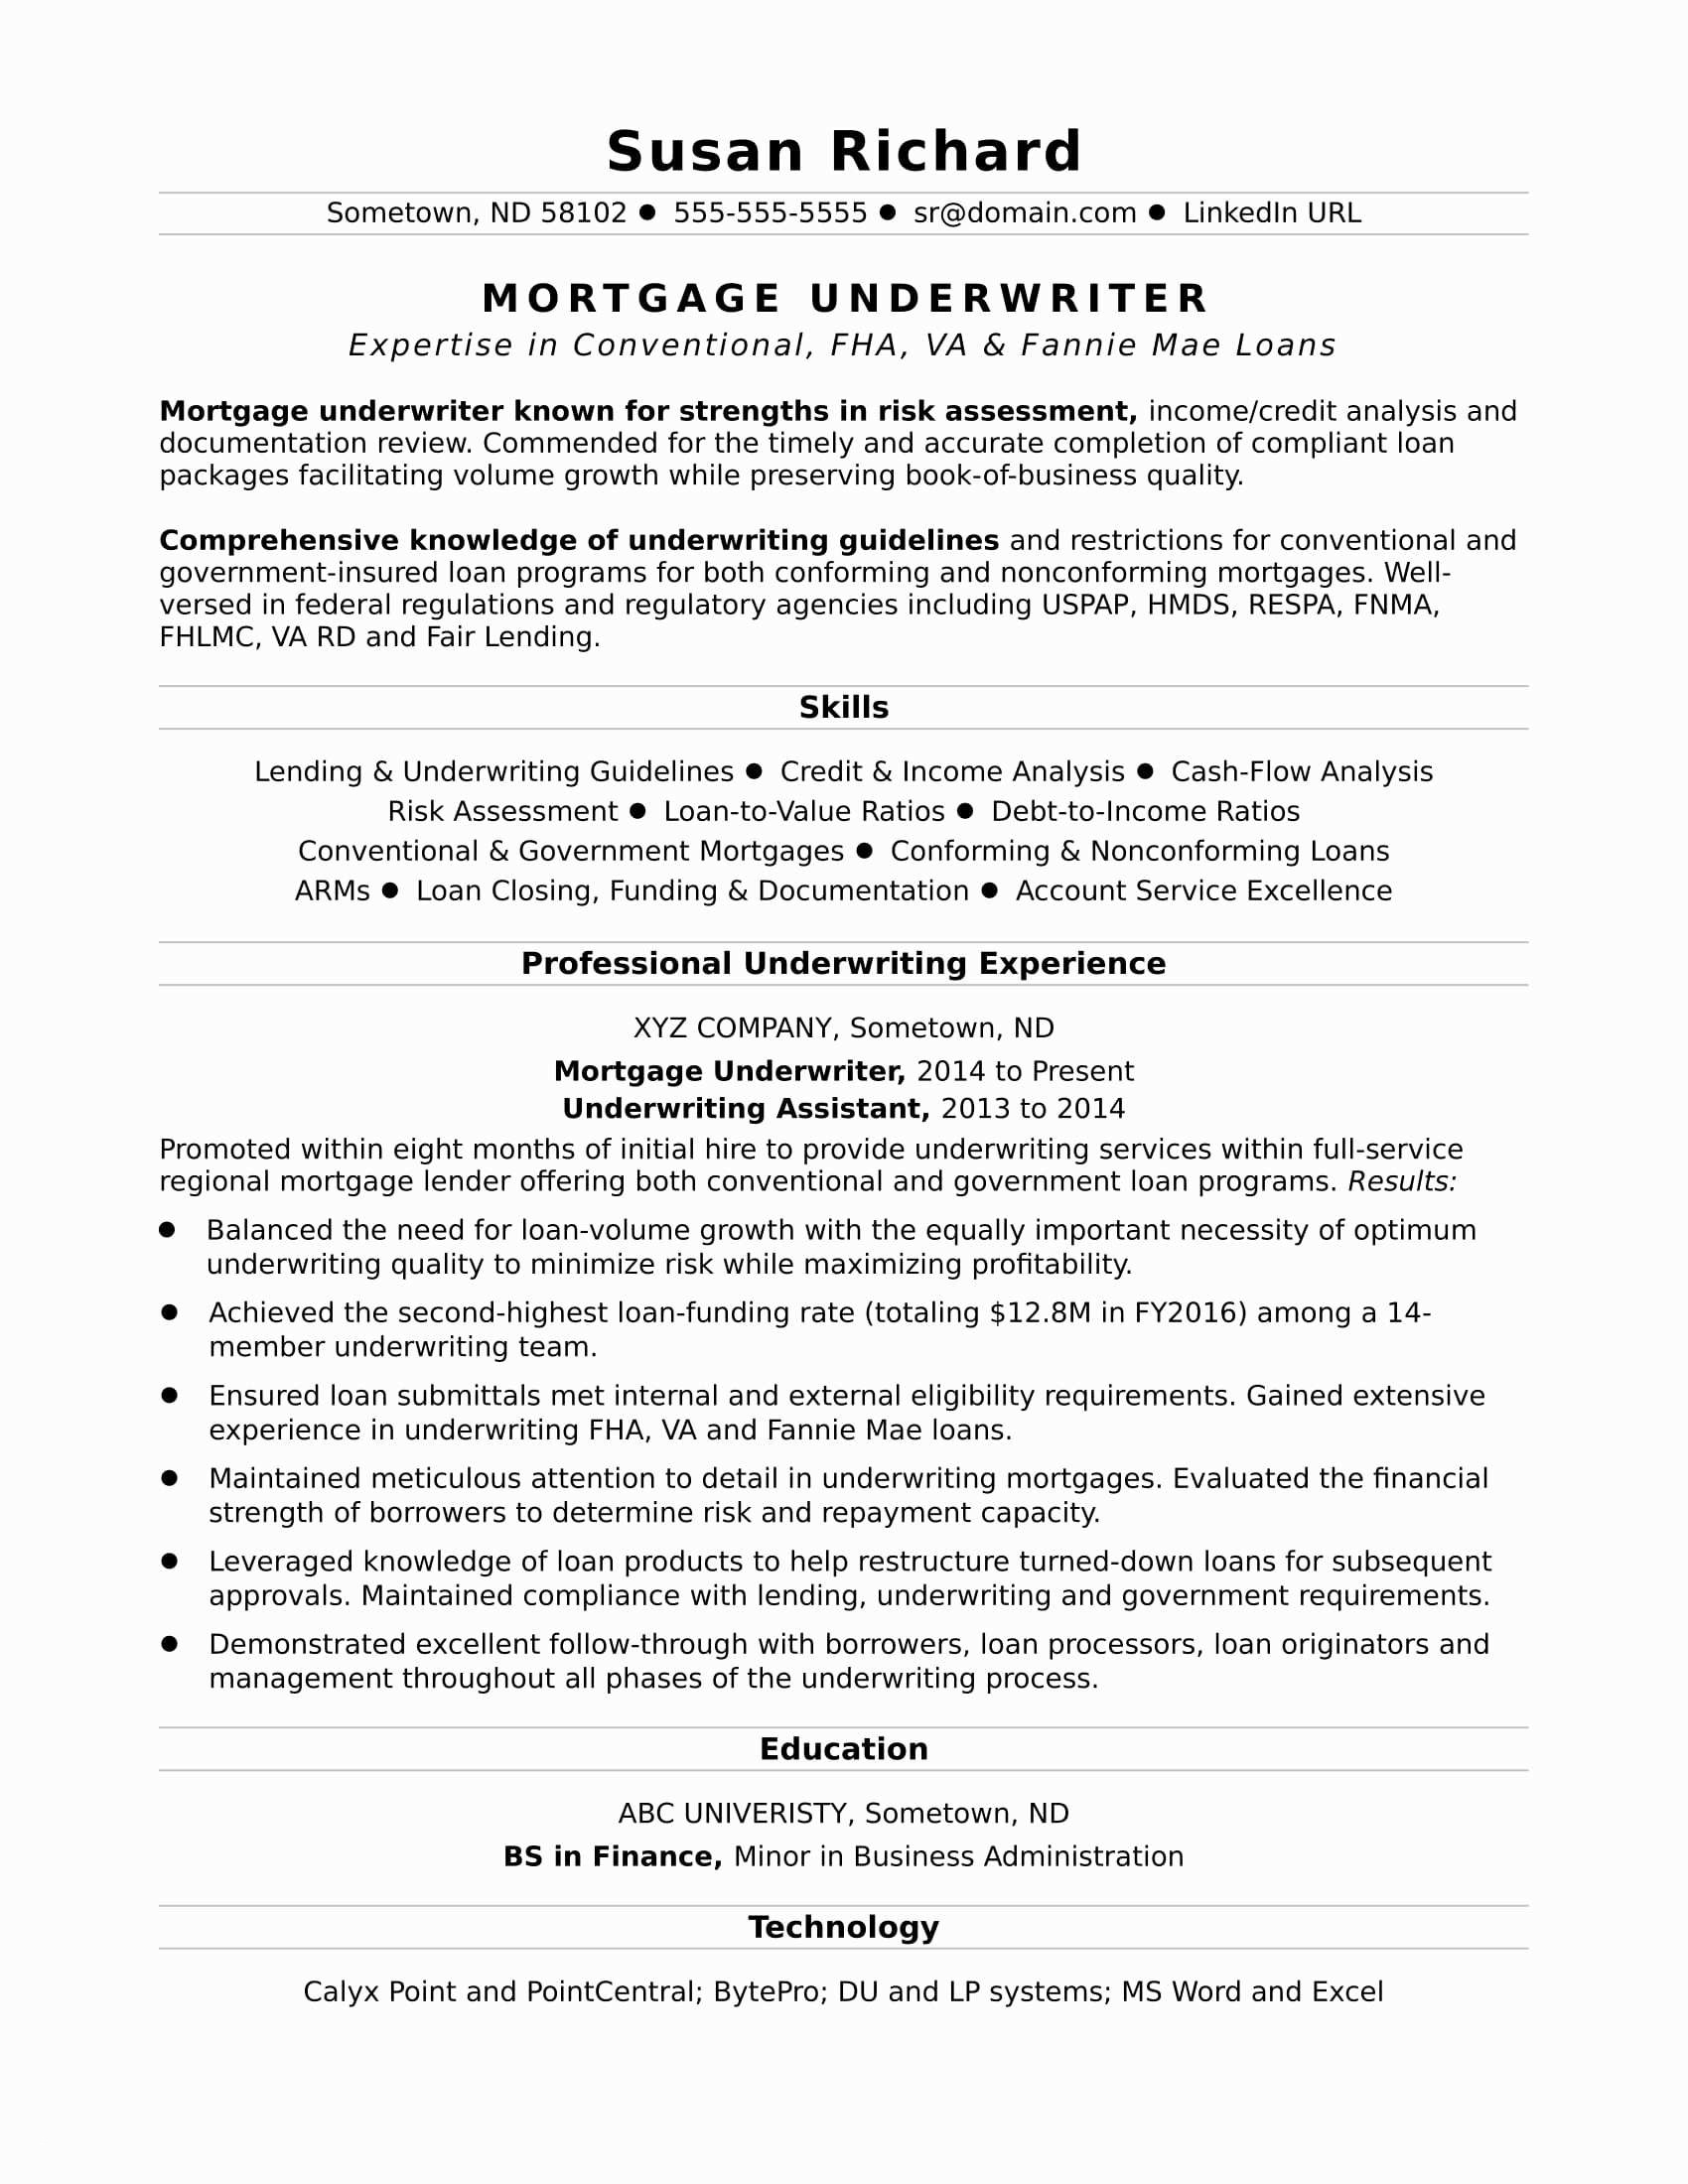 Expert Opinion Letter Template - Teaching Resume Cover Letter New Sample Cover Letter Template Lovely